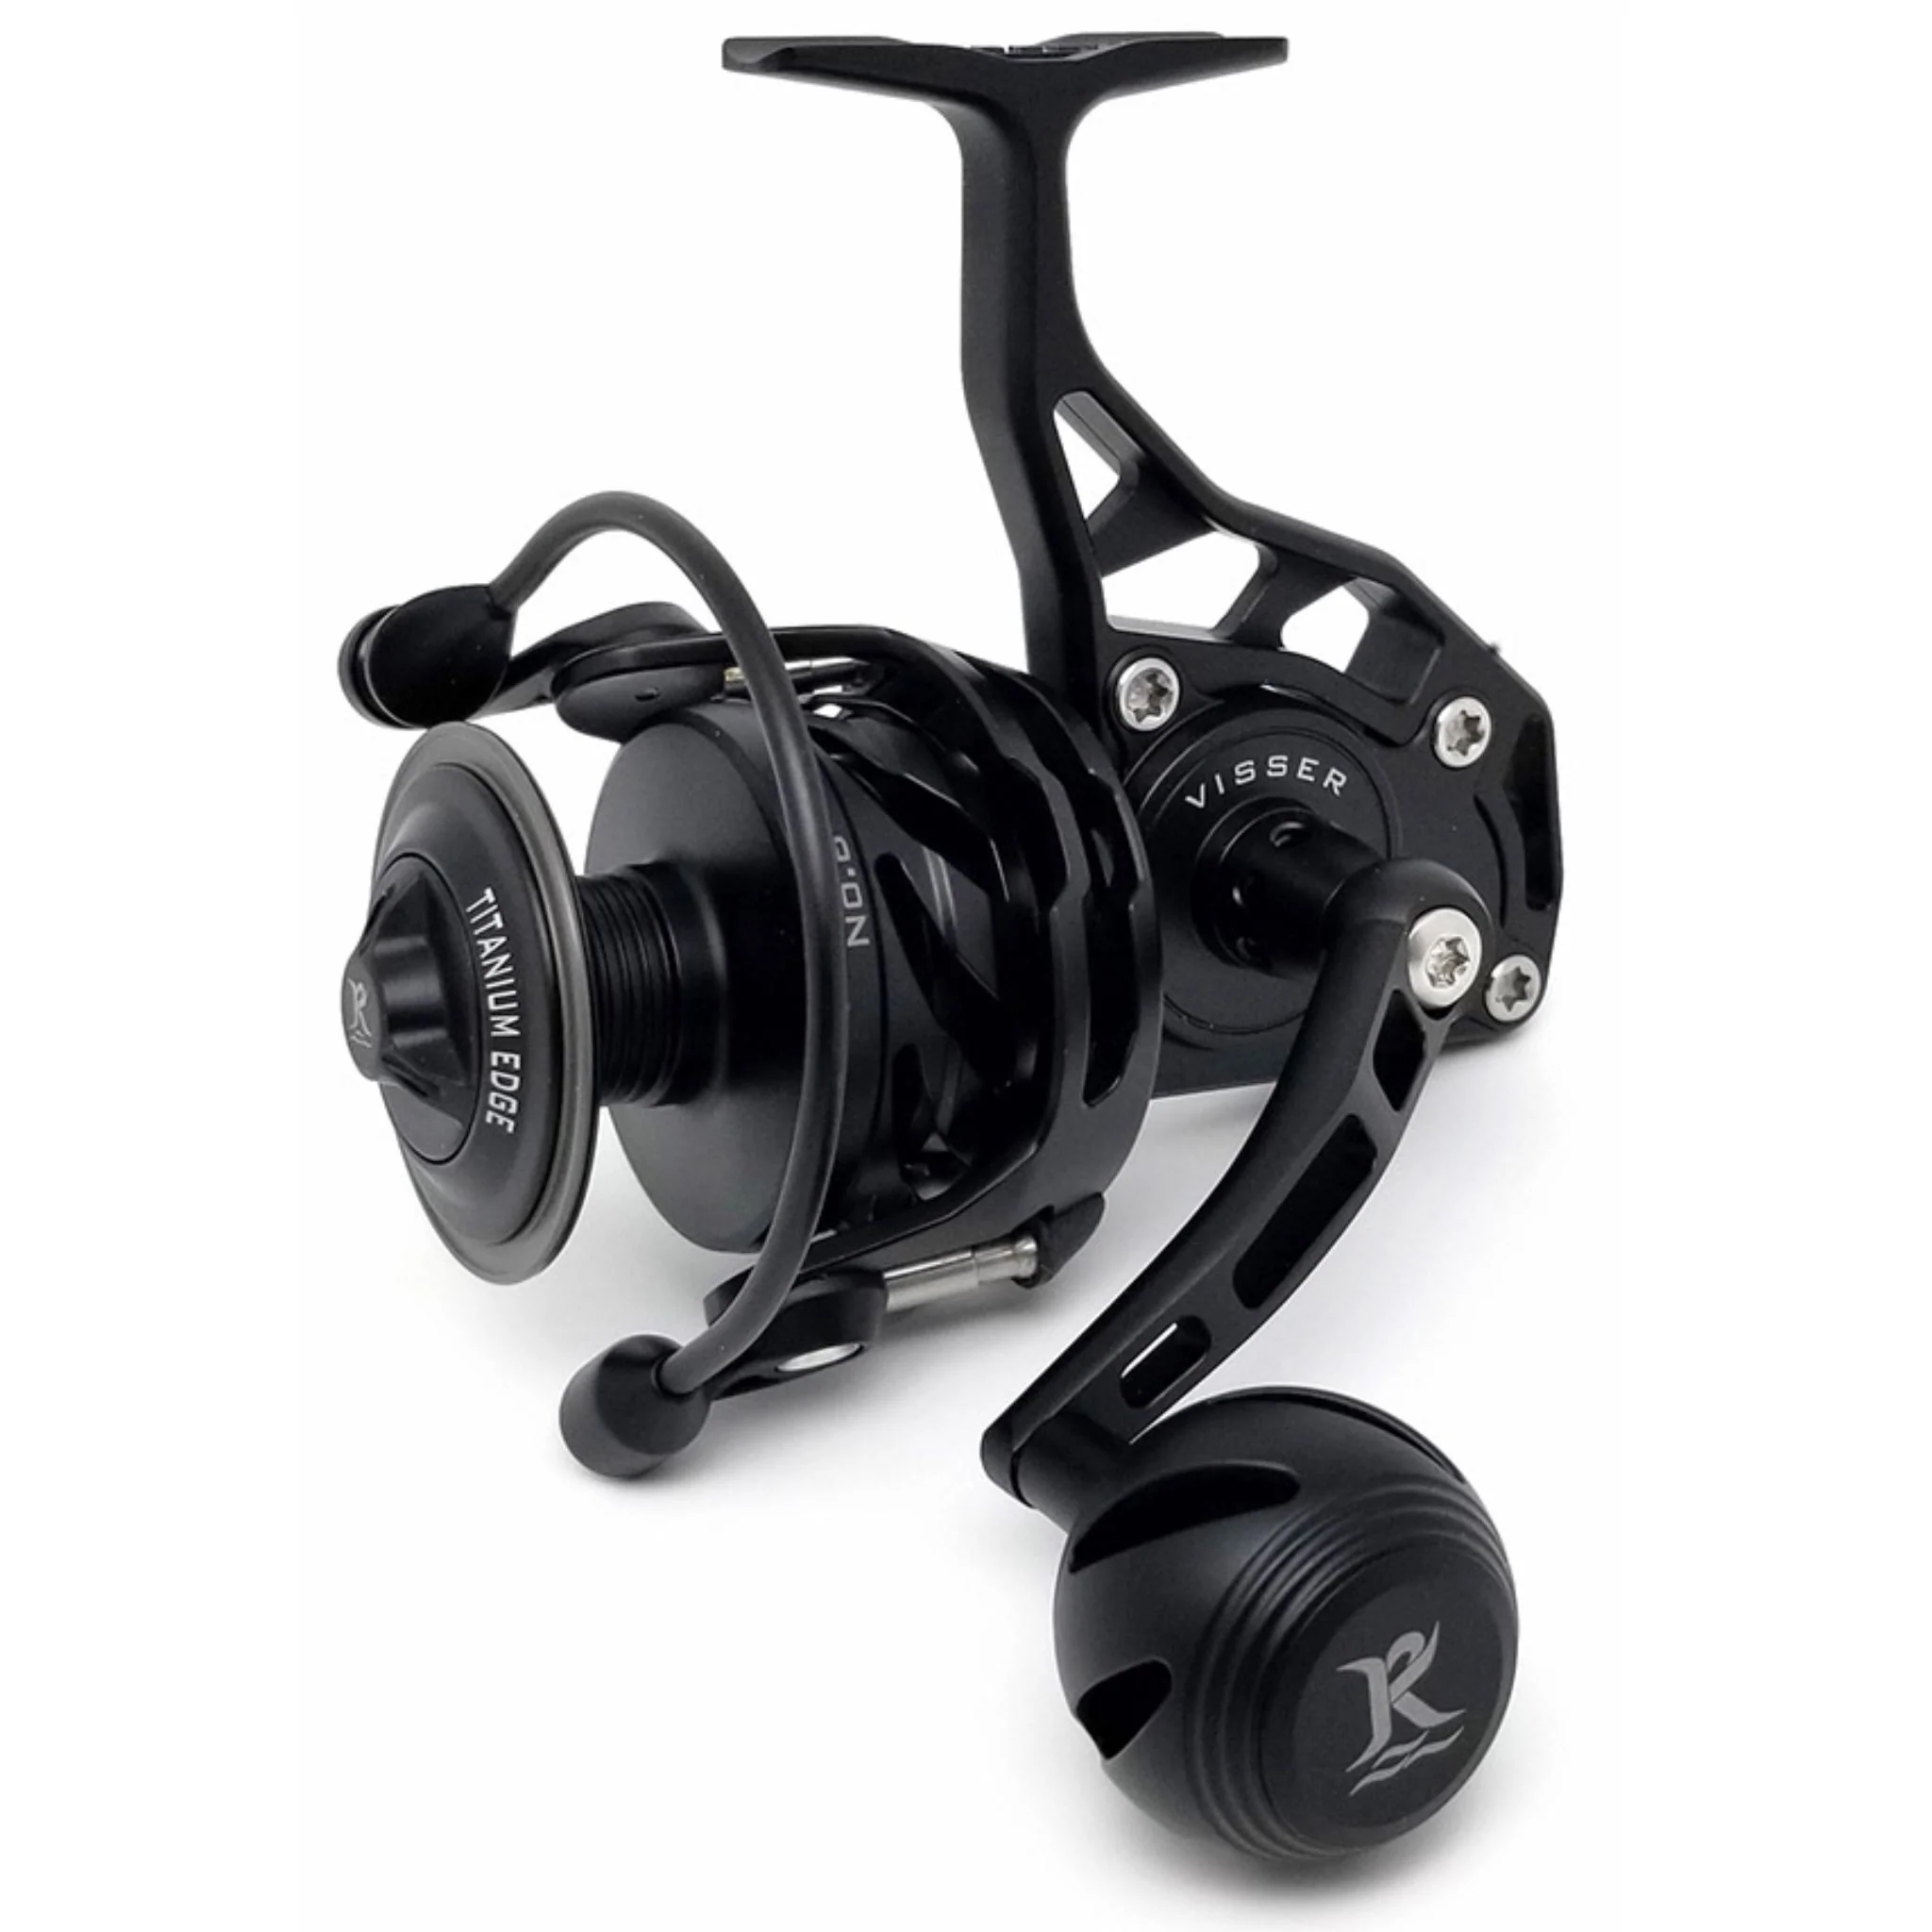 Visser #3 Spinning Reels are Made in the USA! 